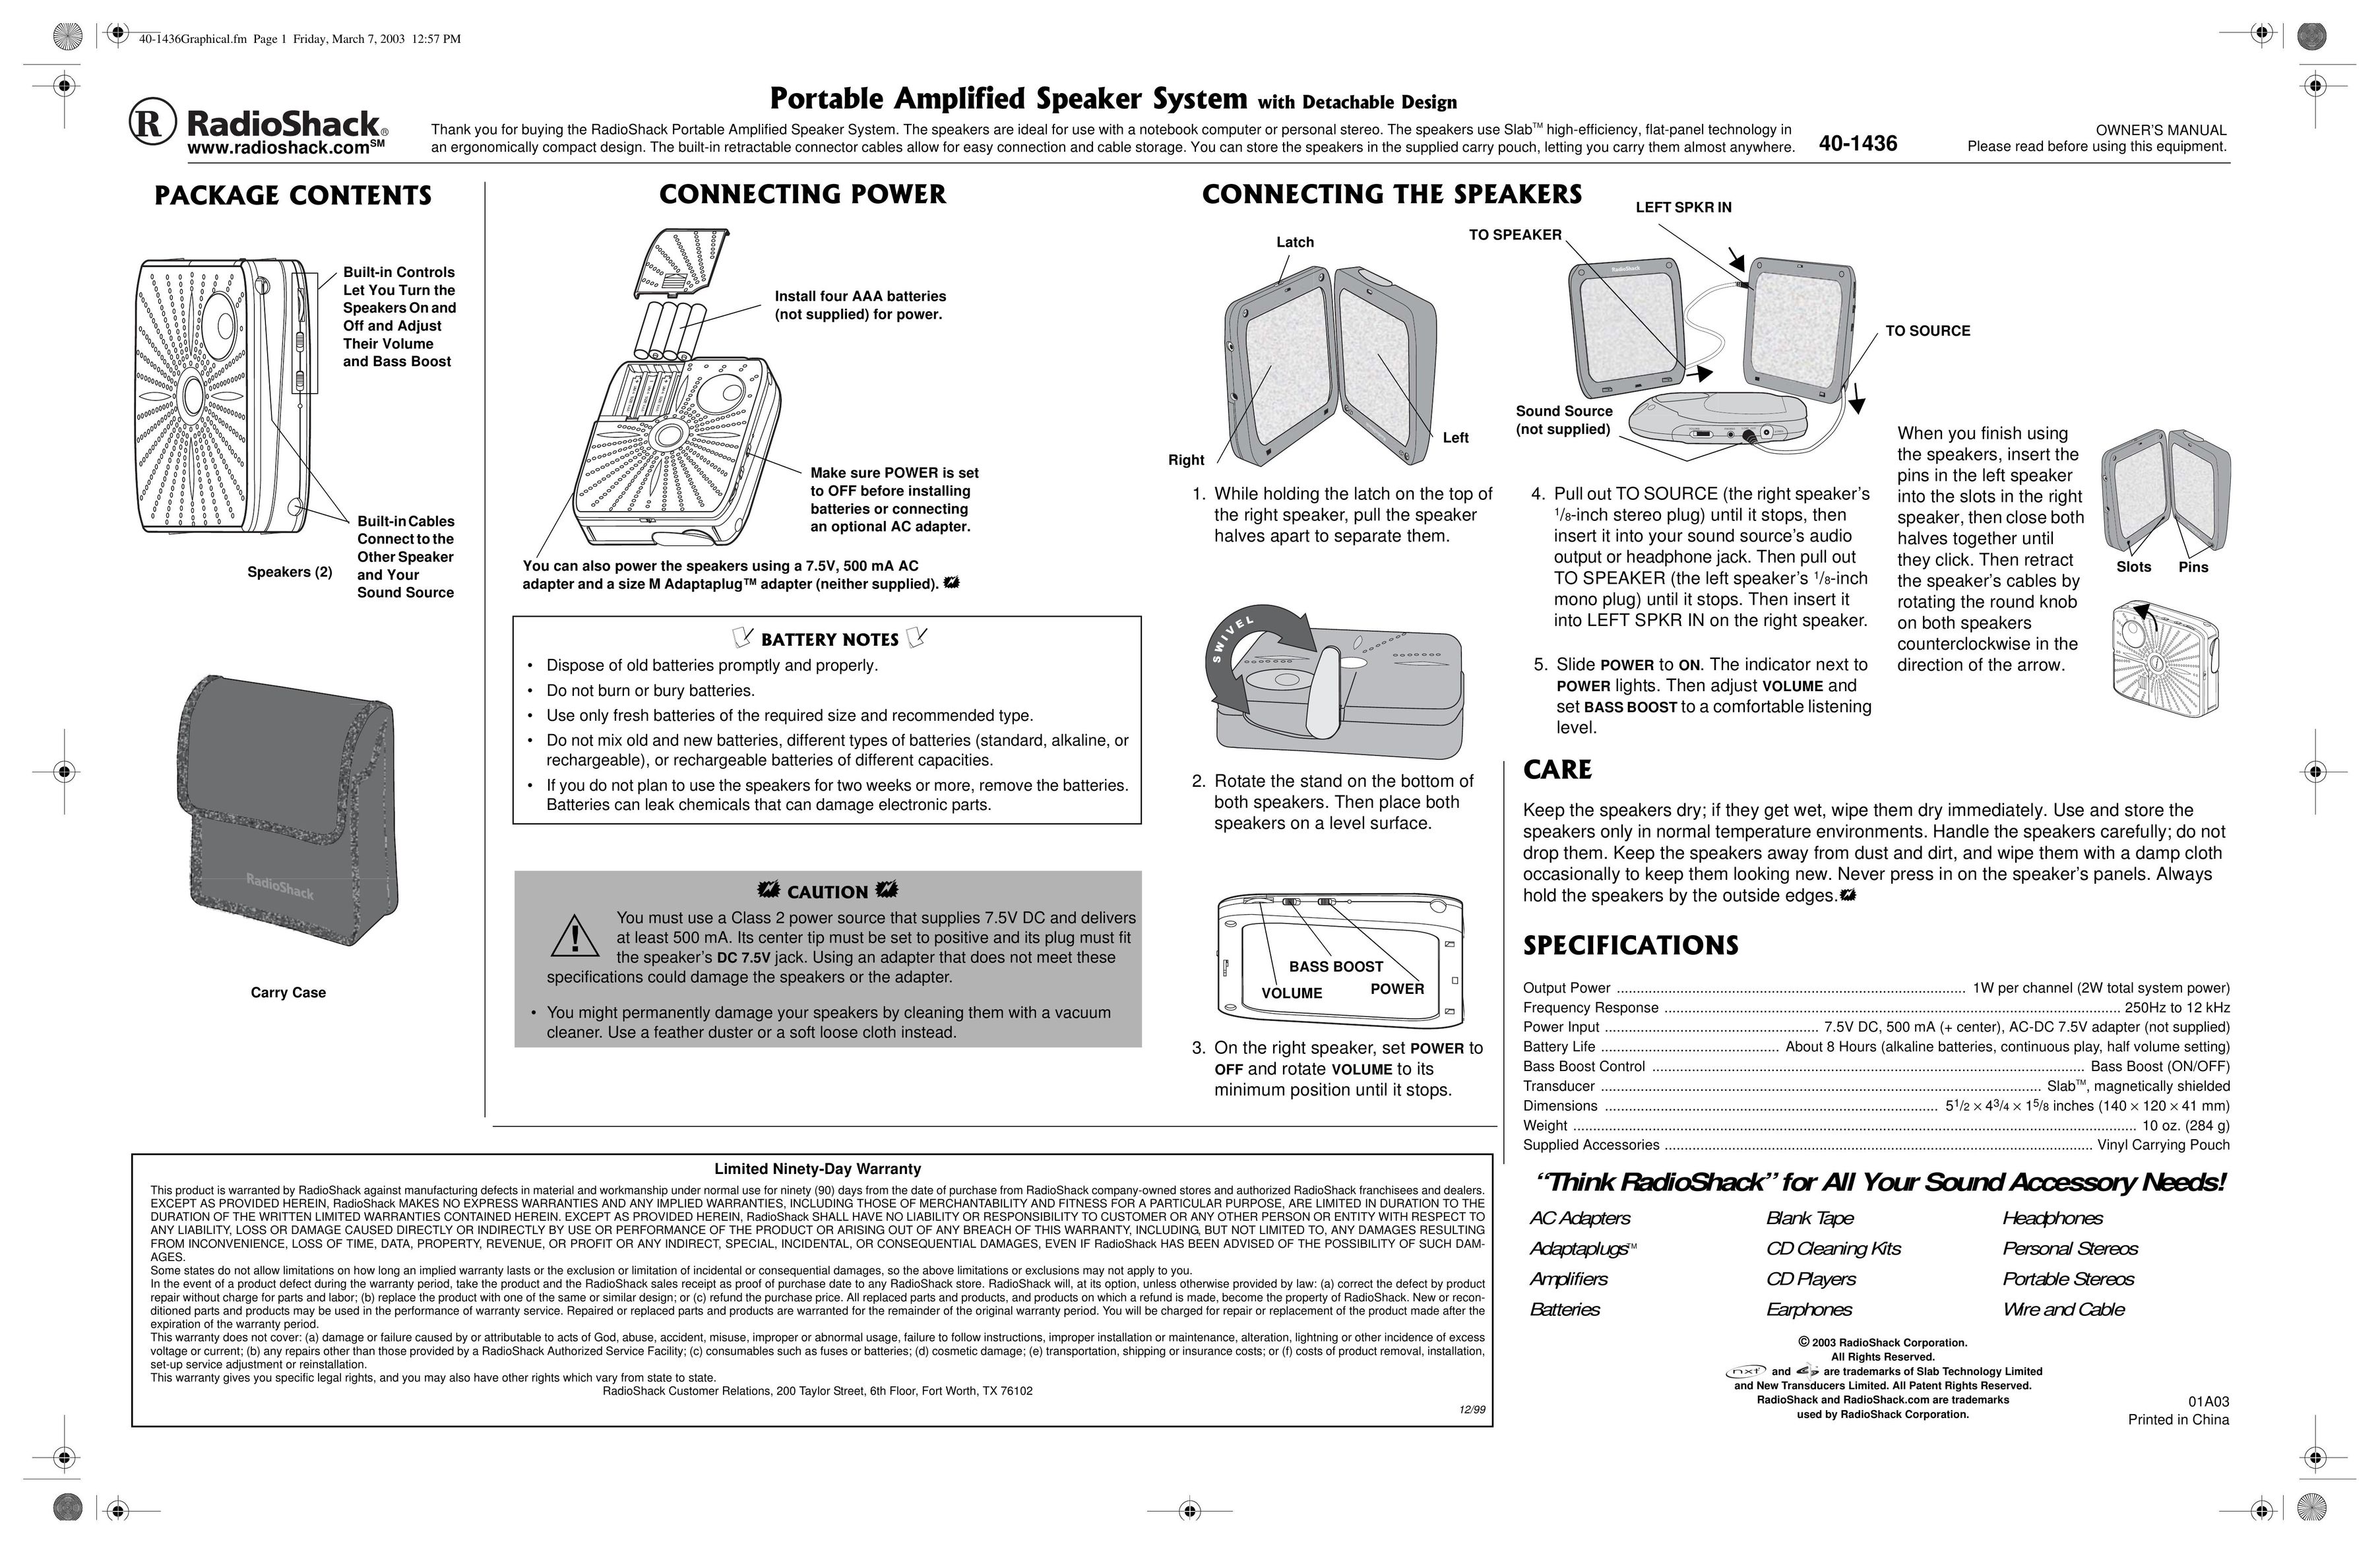 Radio Shack 01A03 Microwave Oven User Manual